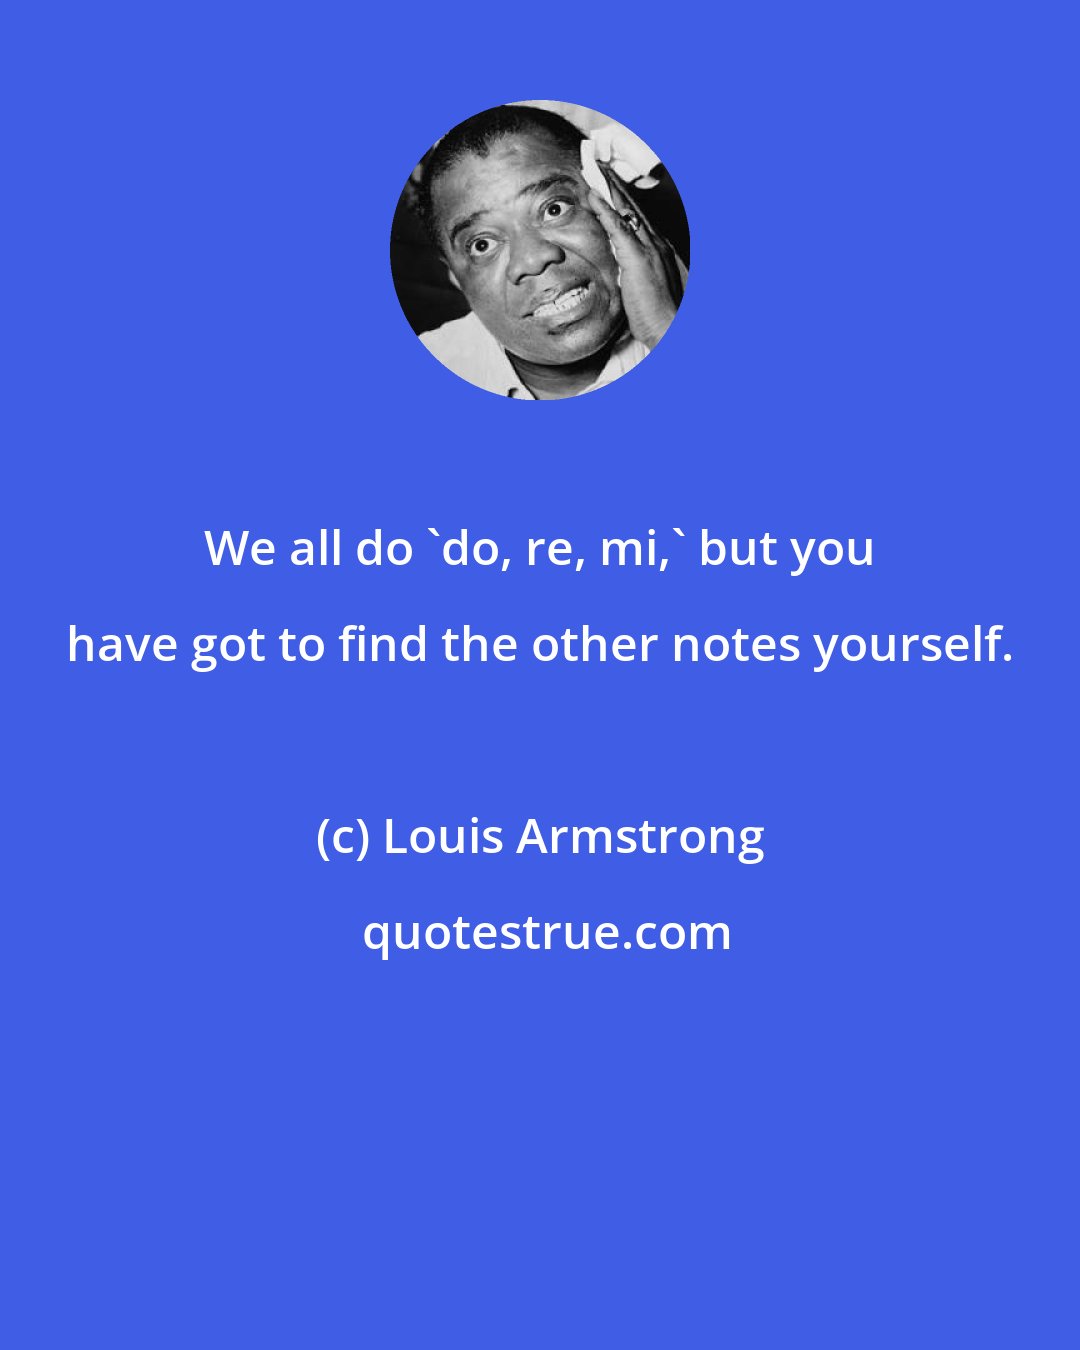 Louis Armstrong: We all do 'do, re, mi,' but you have got to find the other notes yourself.